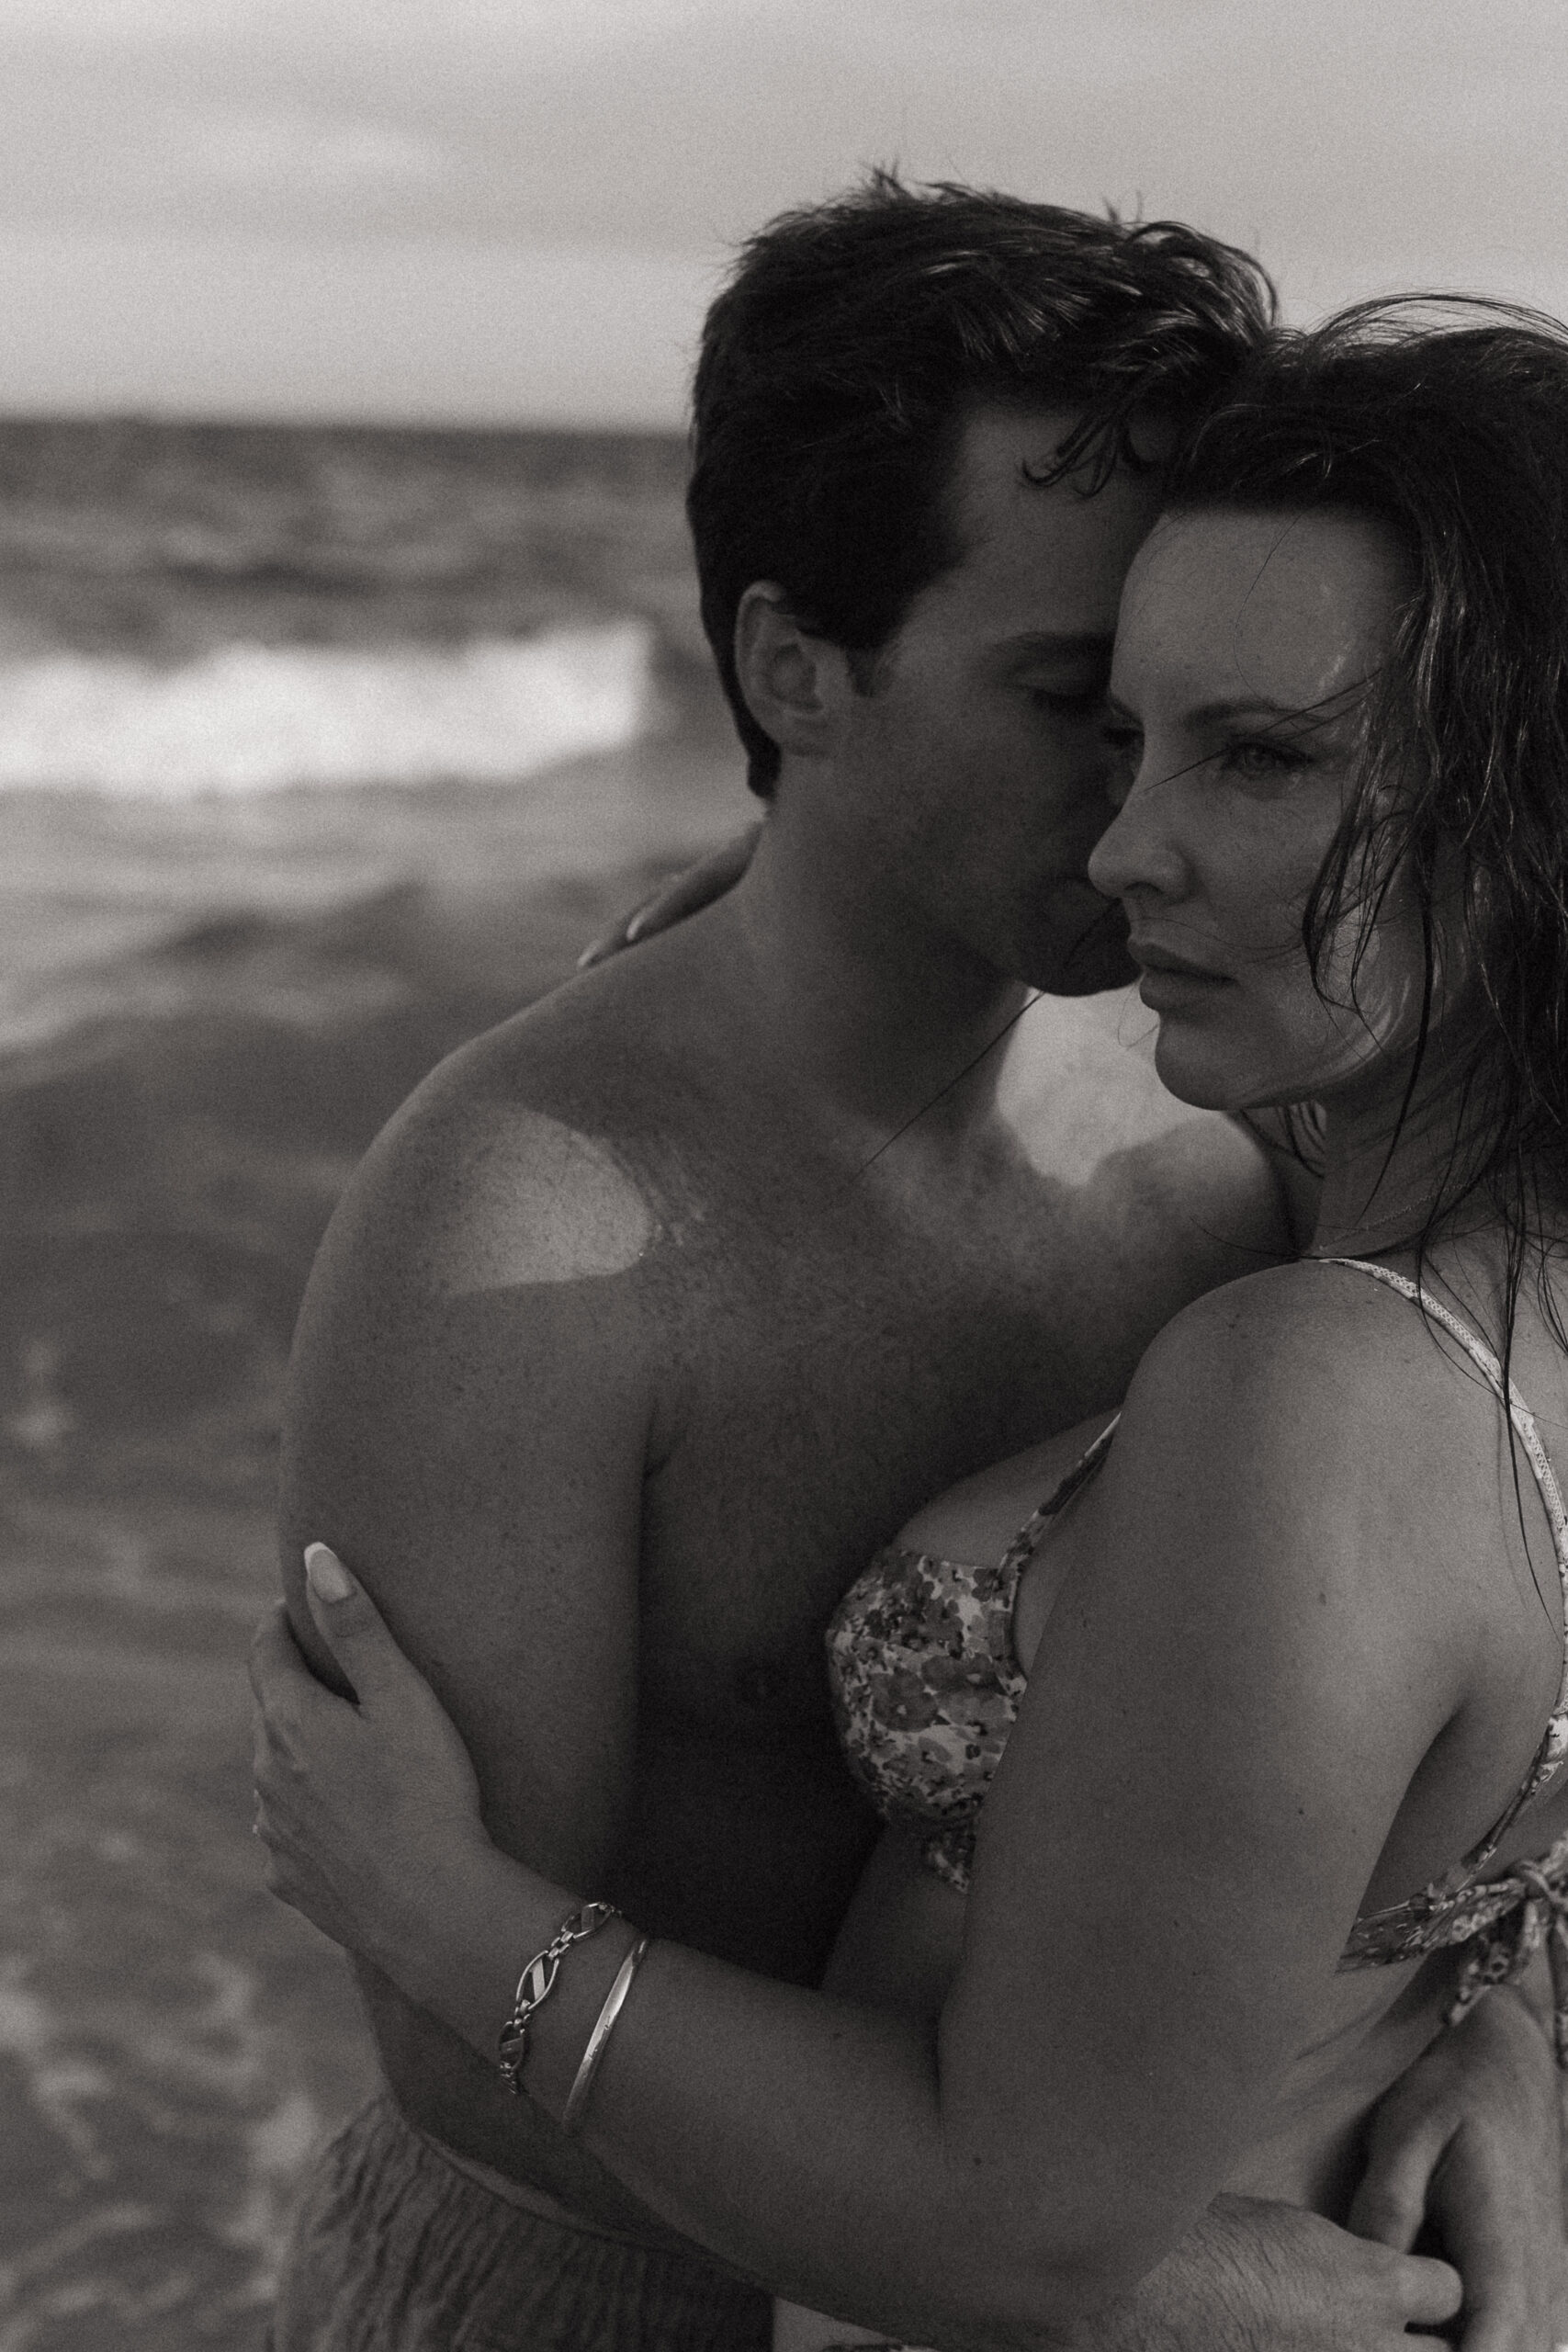 An Vintage-Inspired Engagement Session on the Beaches of Florida